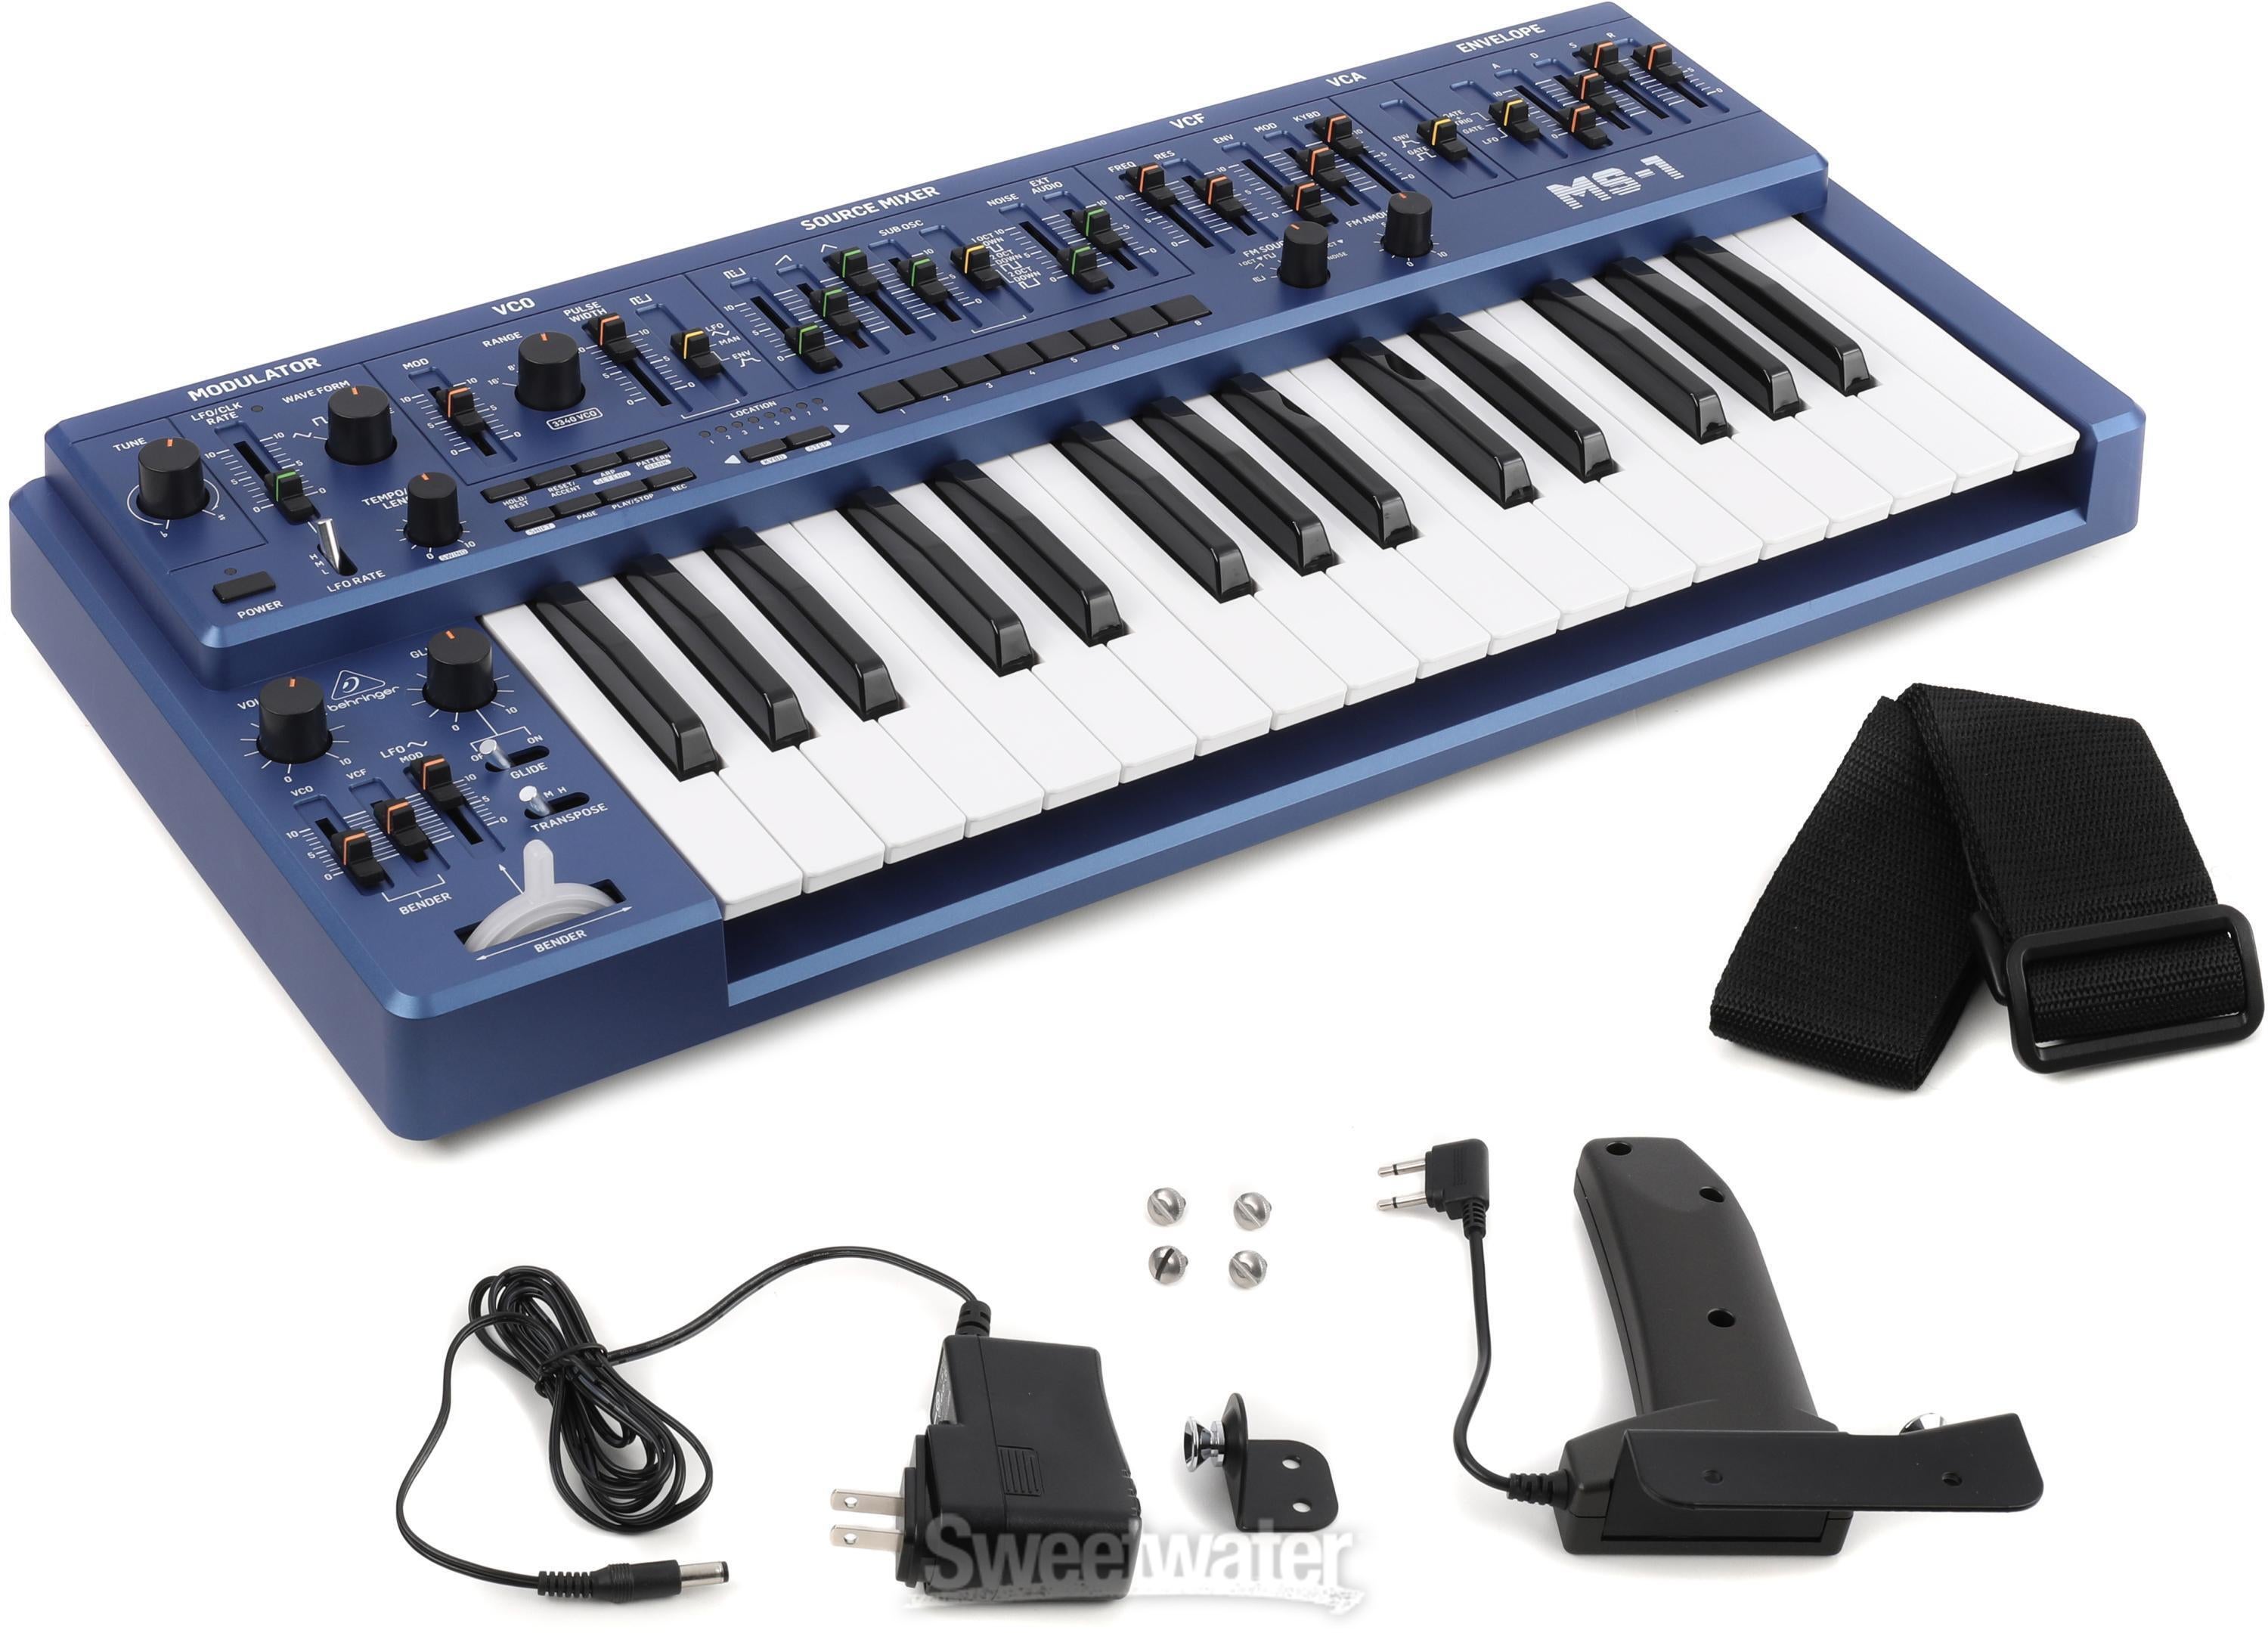 Behringer MS-1-BU Analog Synthesizer with Handgrip - Blue | Sweetwater